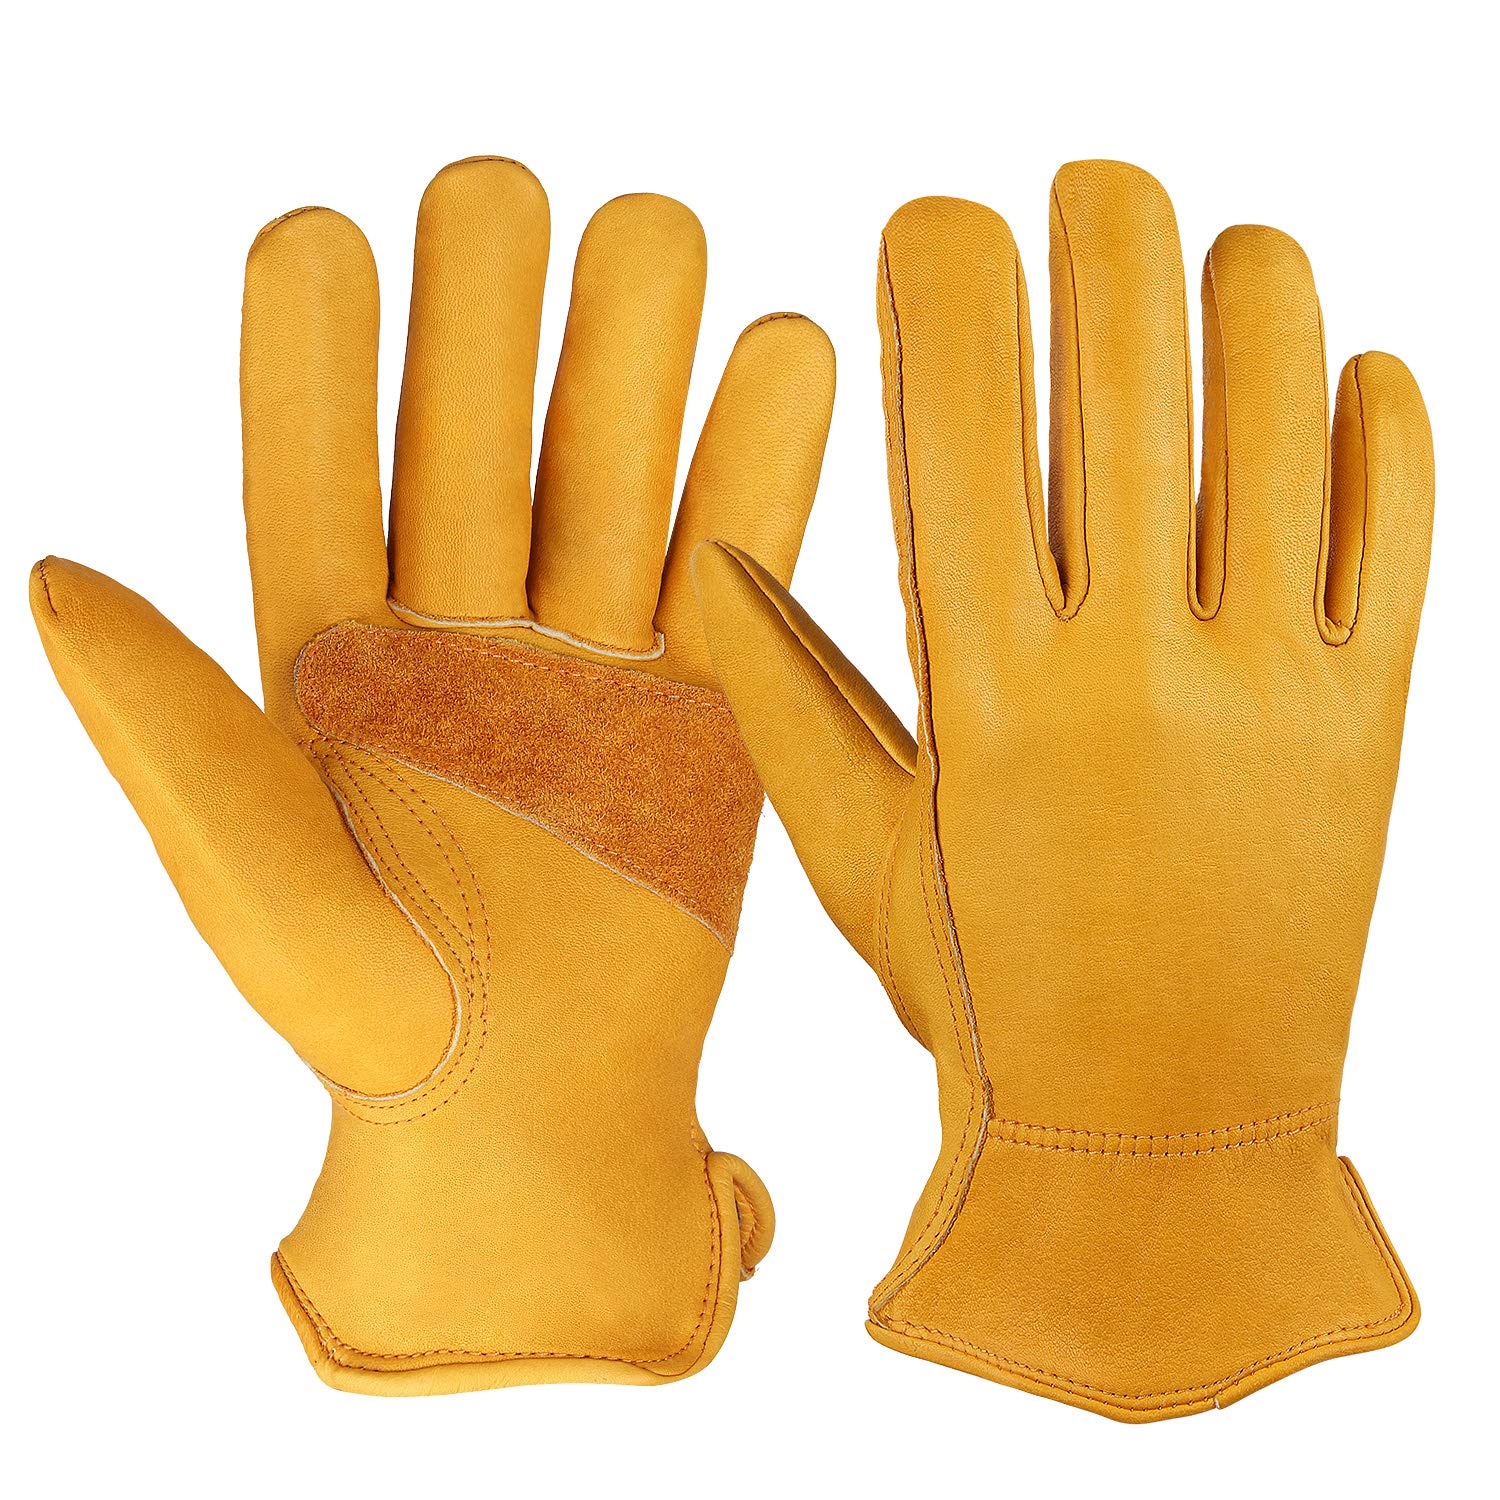 OZERO Flex Grip Leather Work Gloves Stretchable Wrist Tough Cowhide Working Glove 1 Pair (Gold, X-Large)